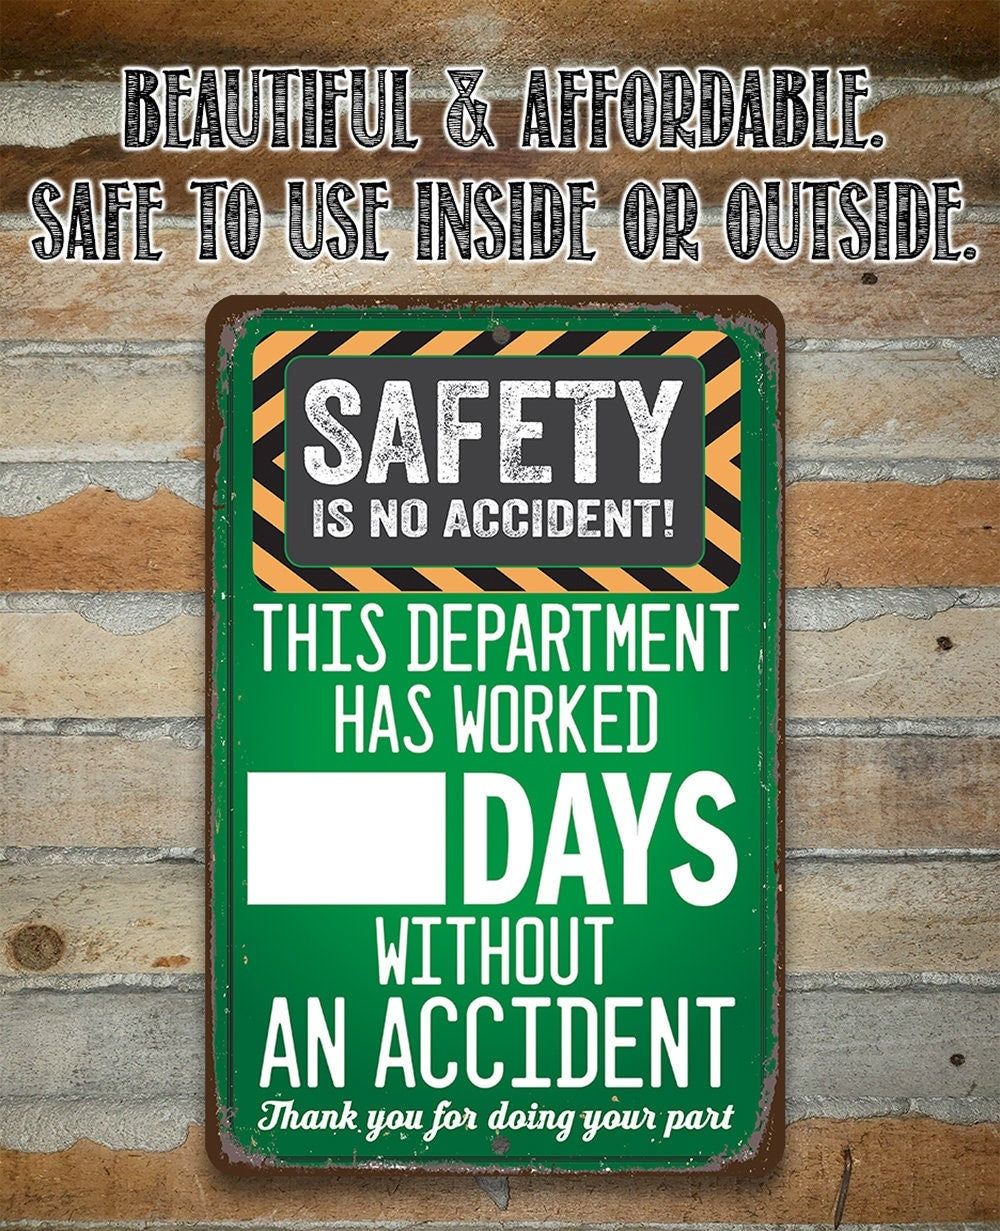 Safety Is No Accident! Caution and Warning Sign, Safety Signage for Office, 8" x 12" or 12" x 18" Aluminum Tin Awesome Metal Poster